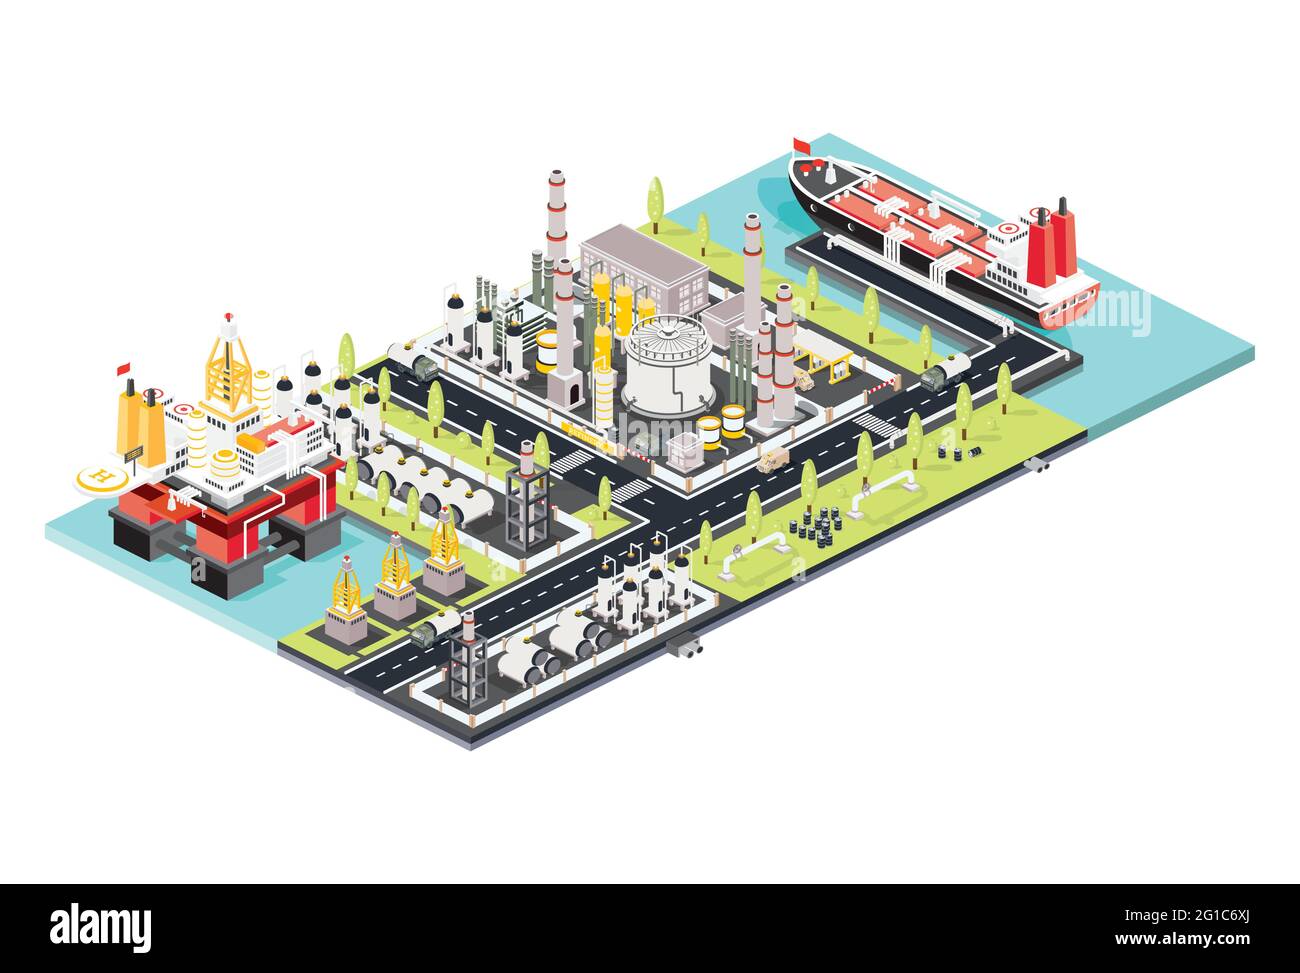 Refinery Plant. Isometric Oil Tank Farm. Offshore Oil Rig. Maritime Port with Oil Tanker Moored at an Oil Storage Silo Terminal. Oil Petroleum Industr Stock Vector